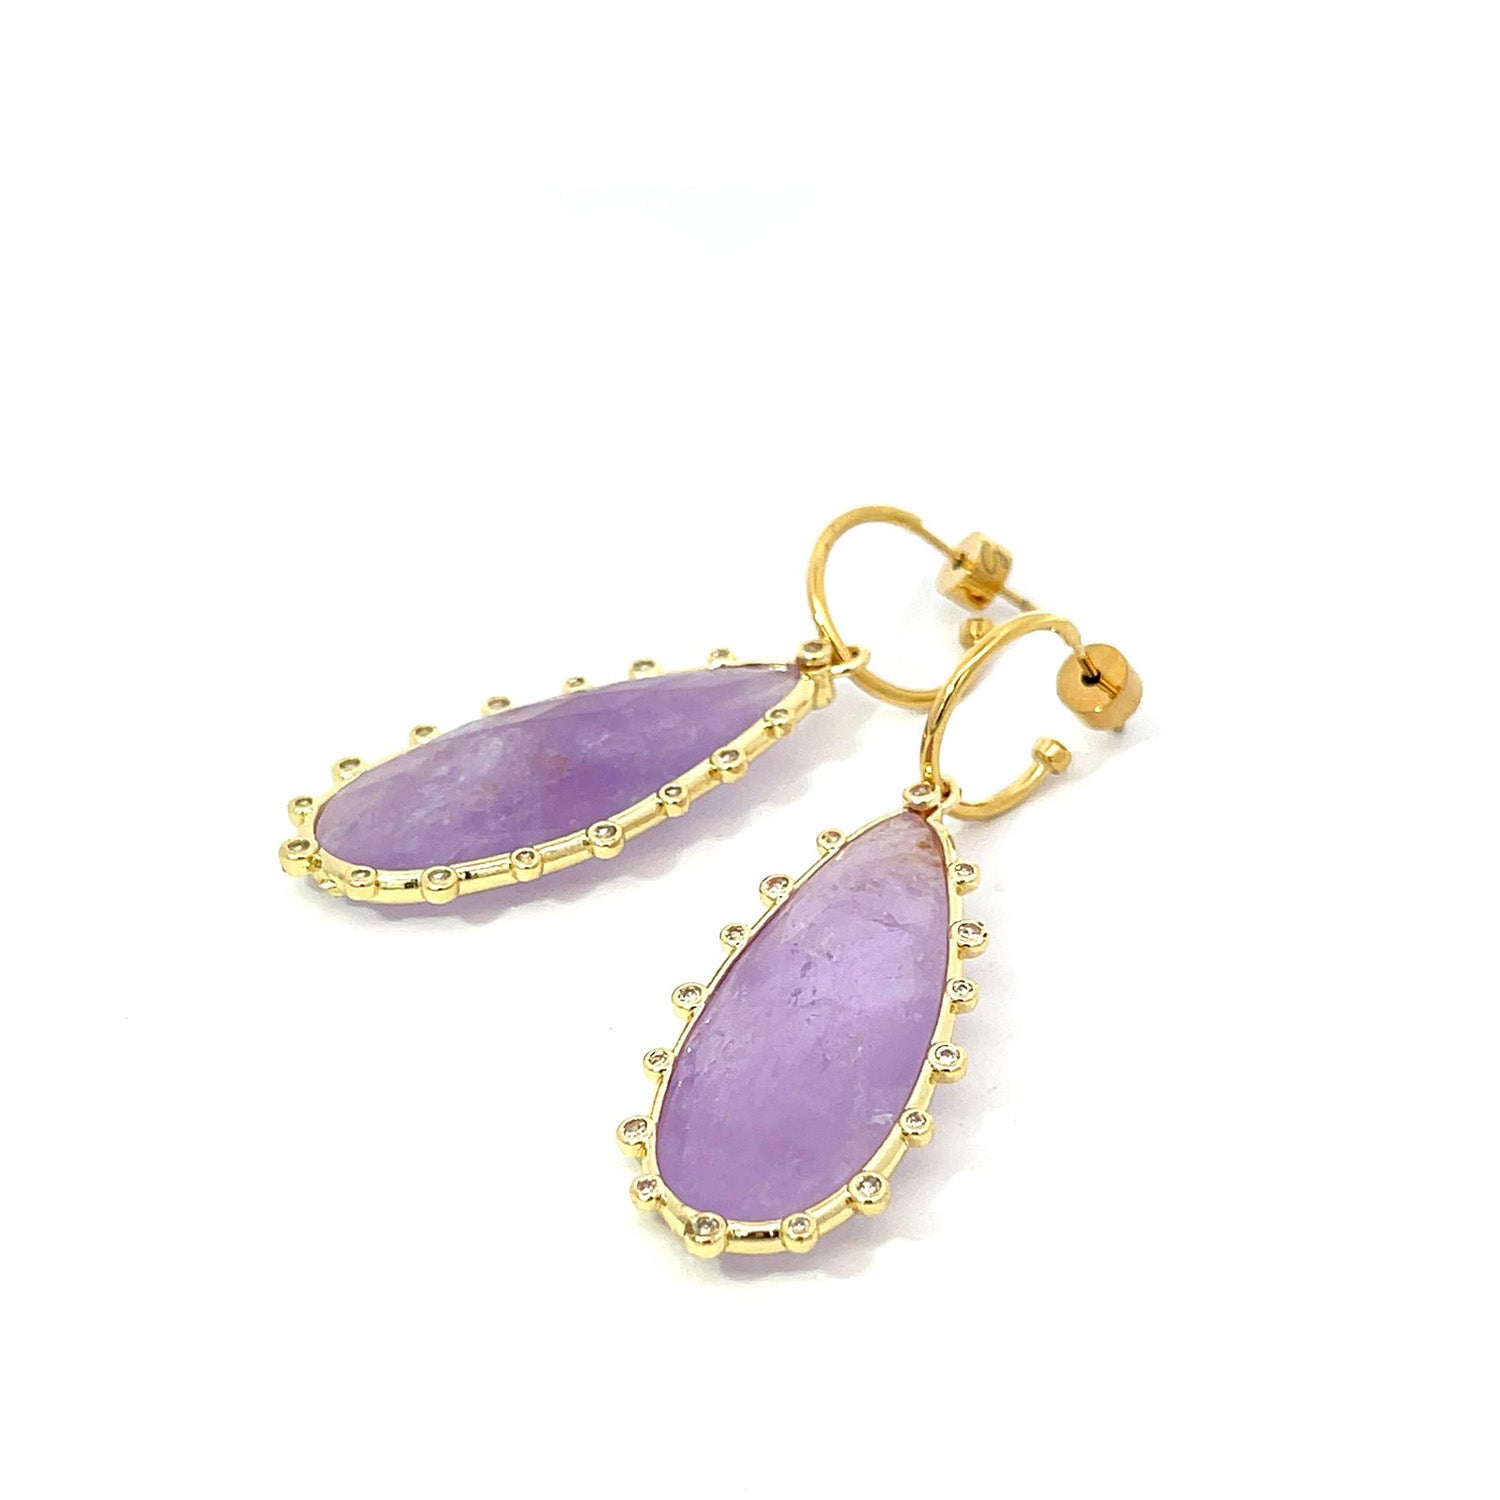 Discover Spiked Beauty: Amethyst Earrings Collection